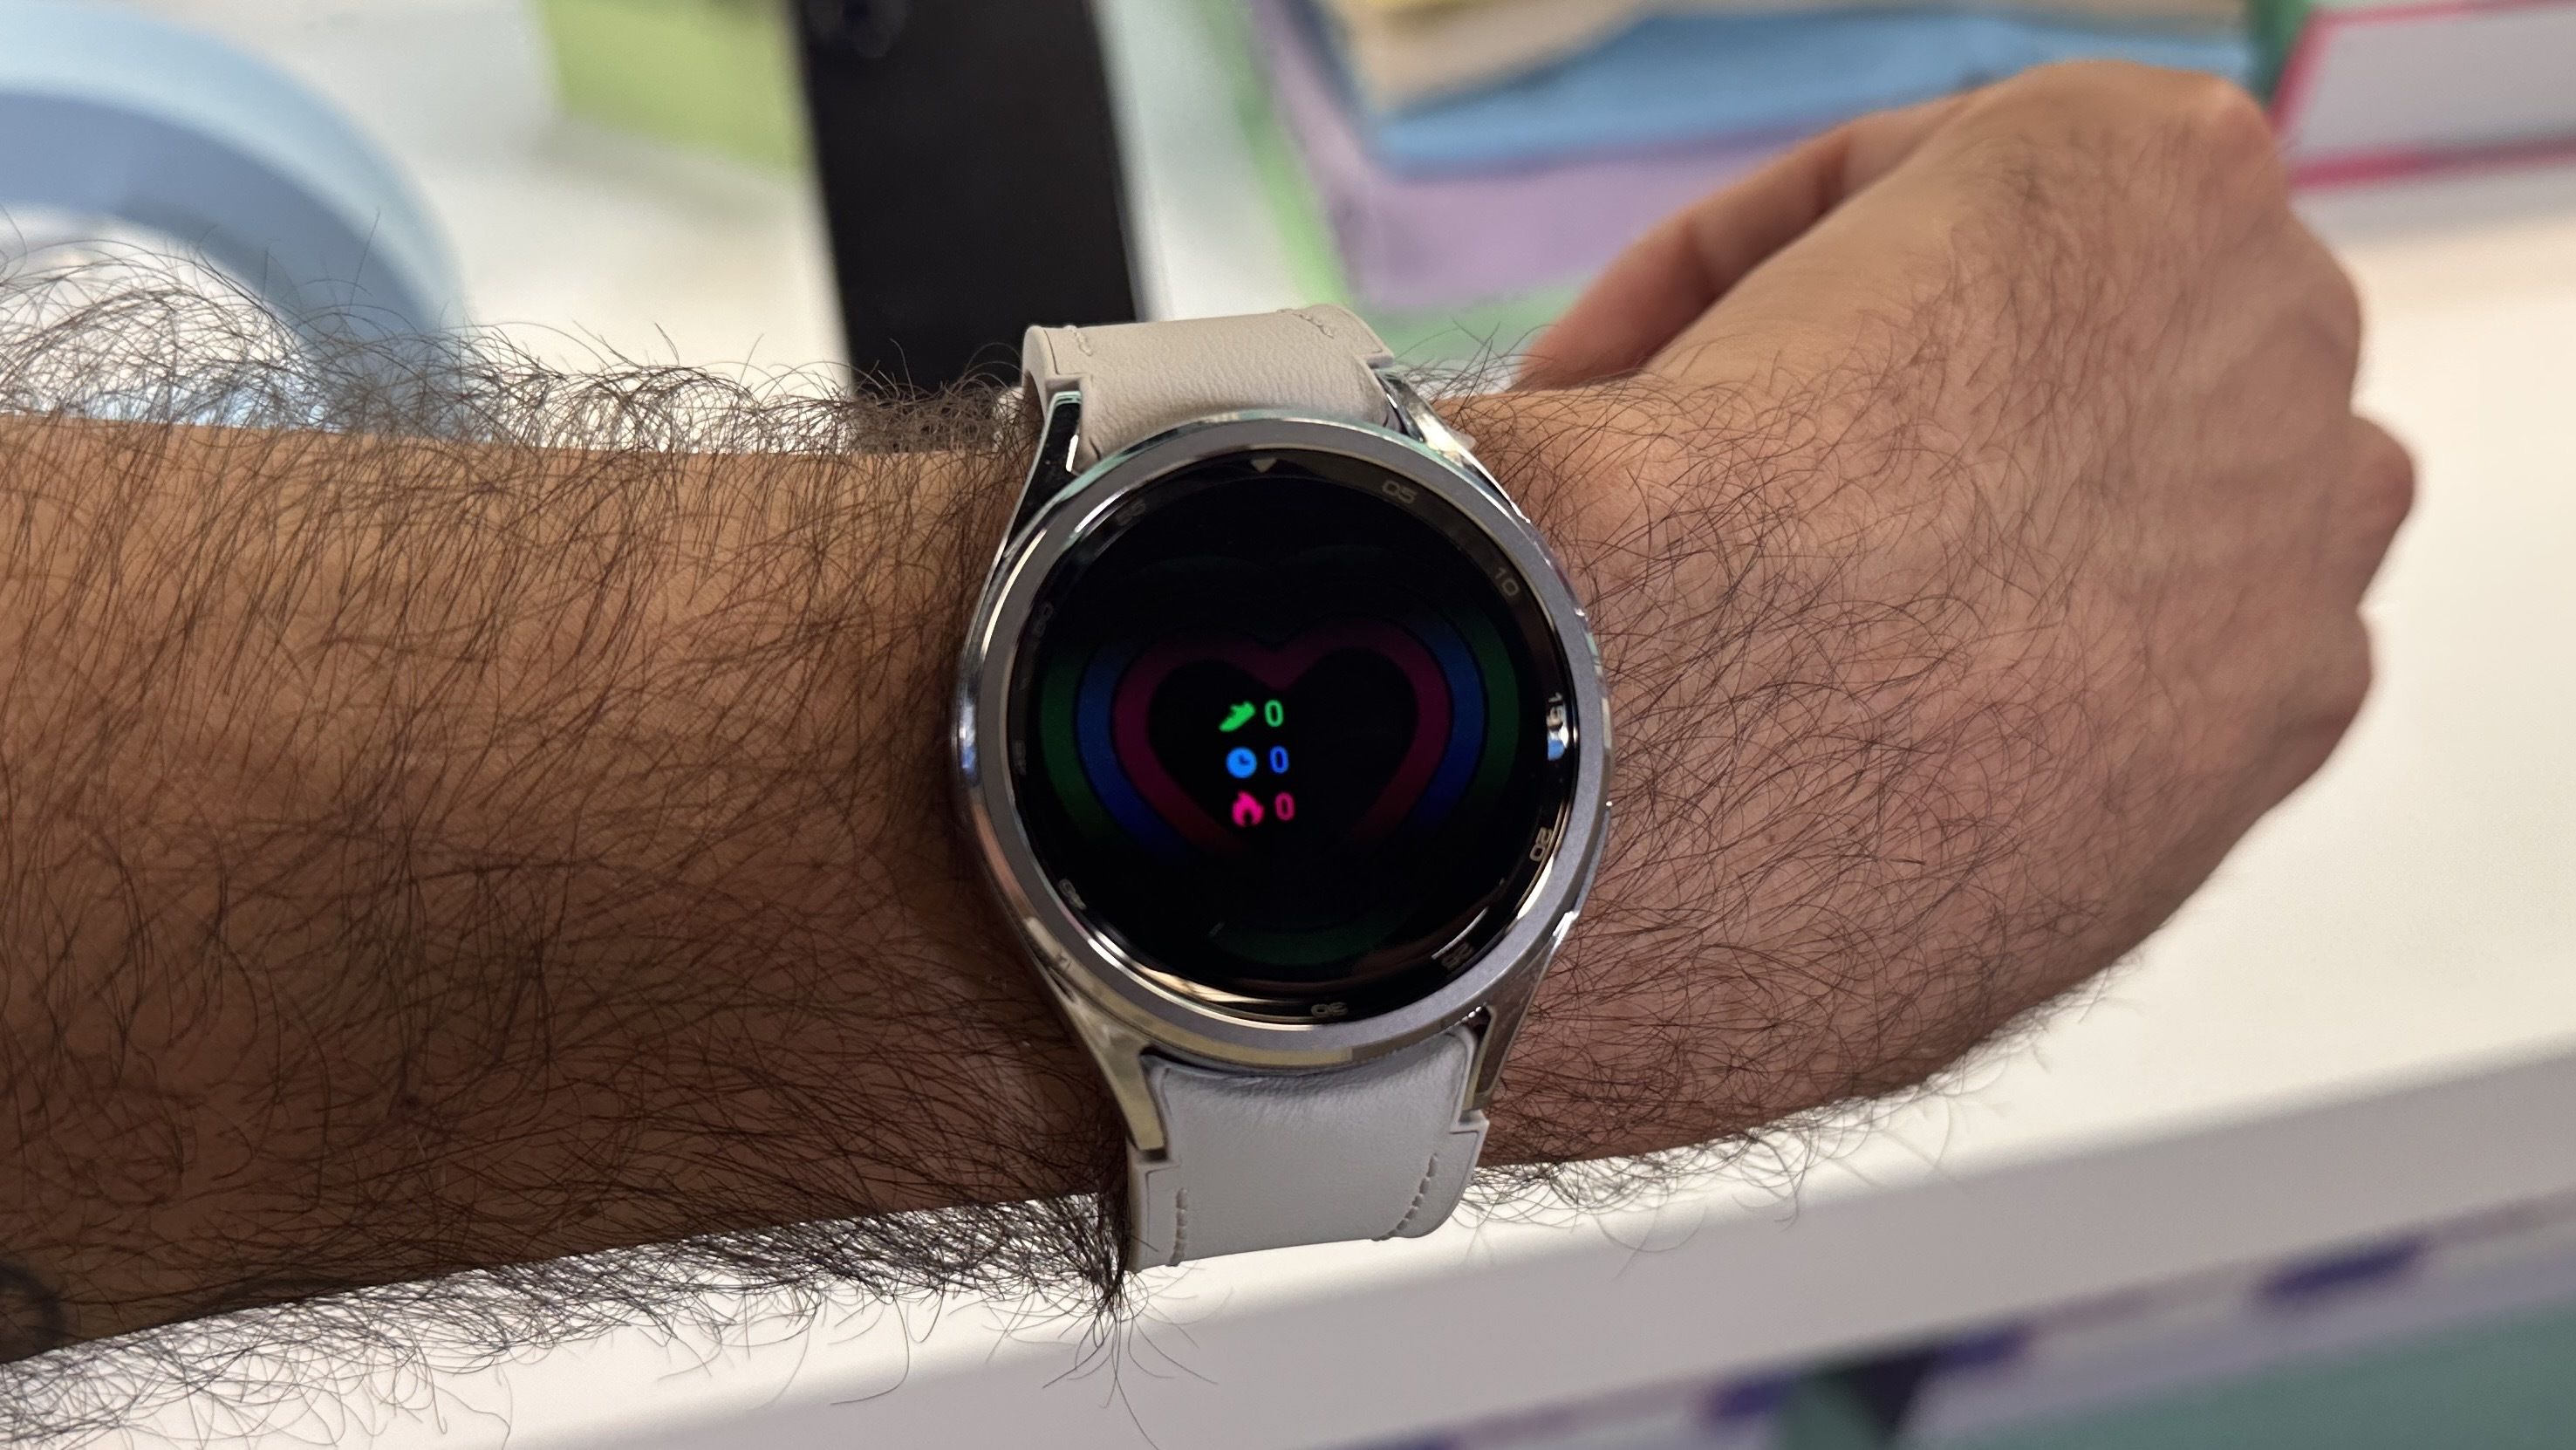 Here's how much the Galaxy Watch 4 costs and when you can buy it